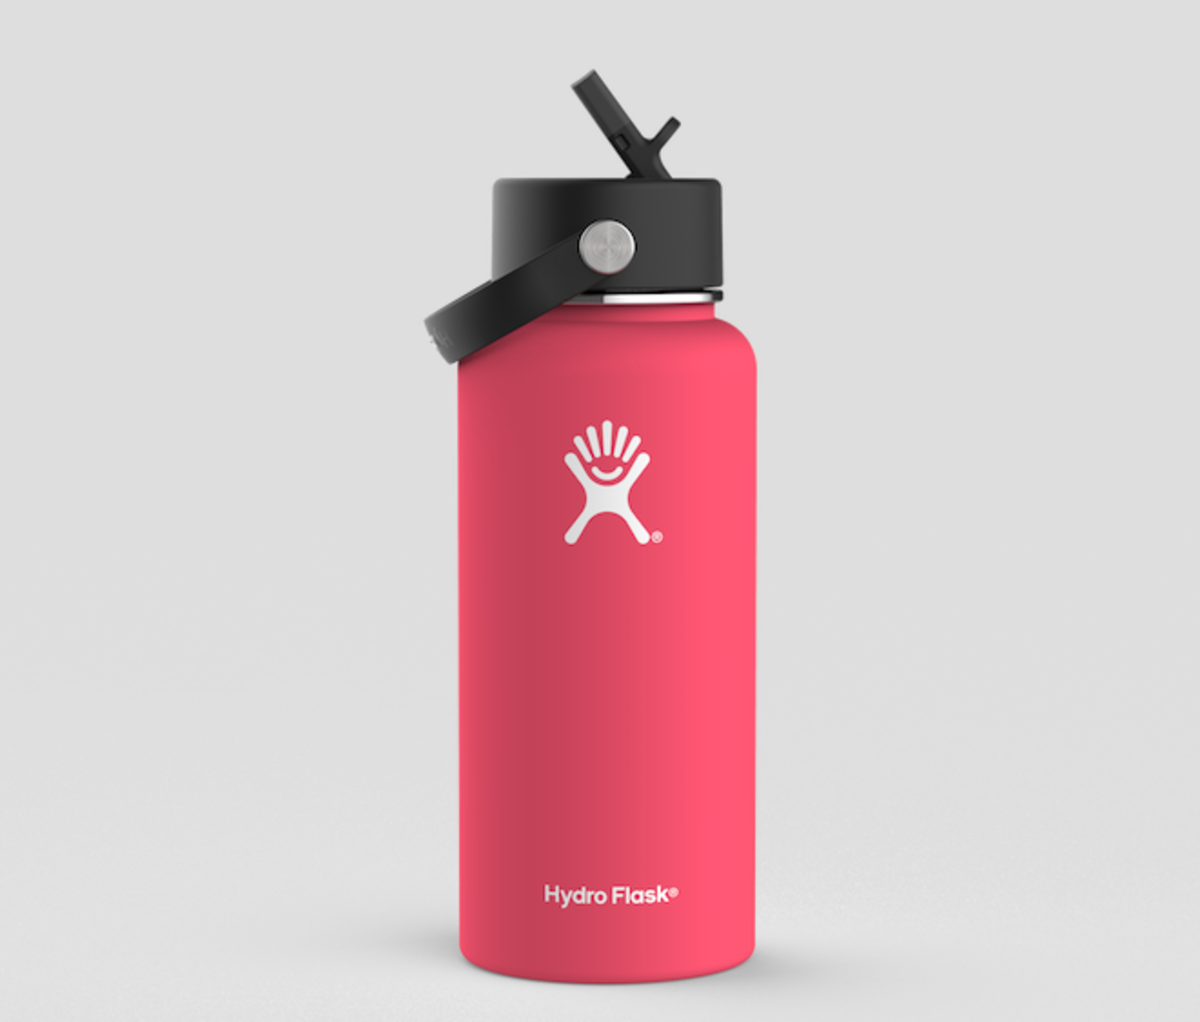 Hydro Flask Introduces New Cooler Cup